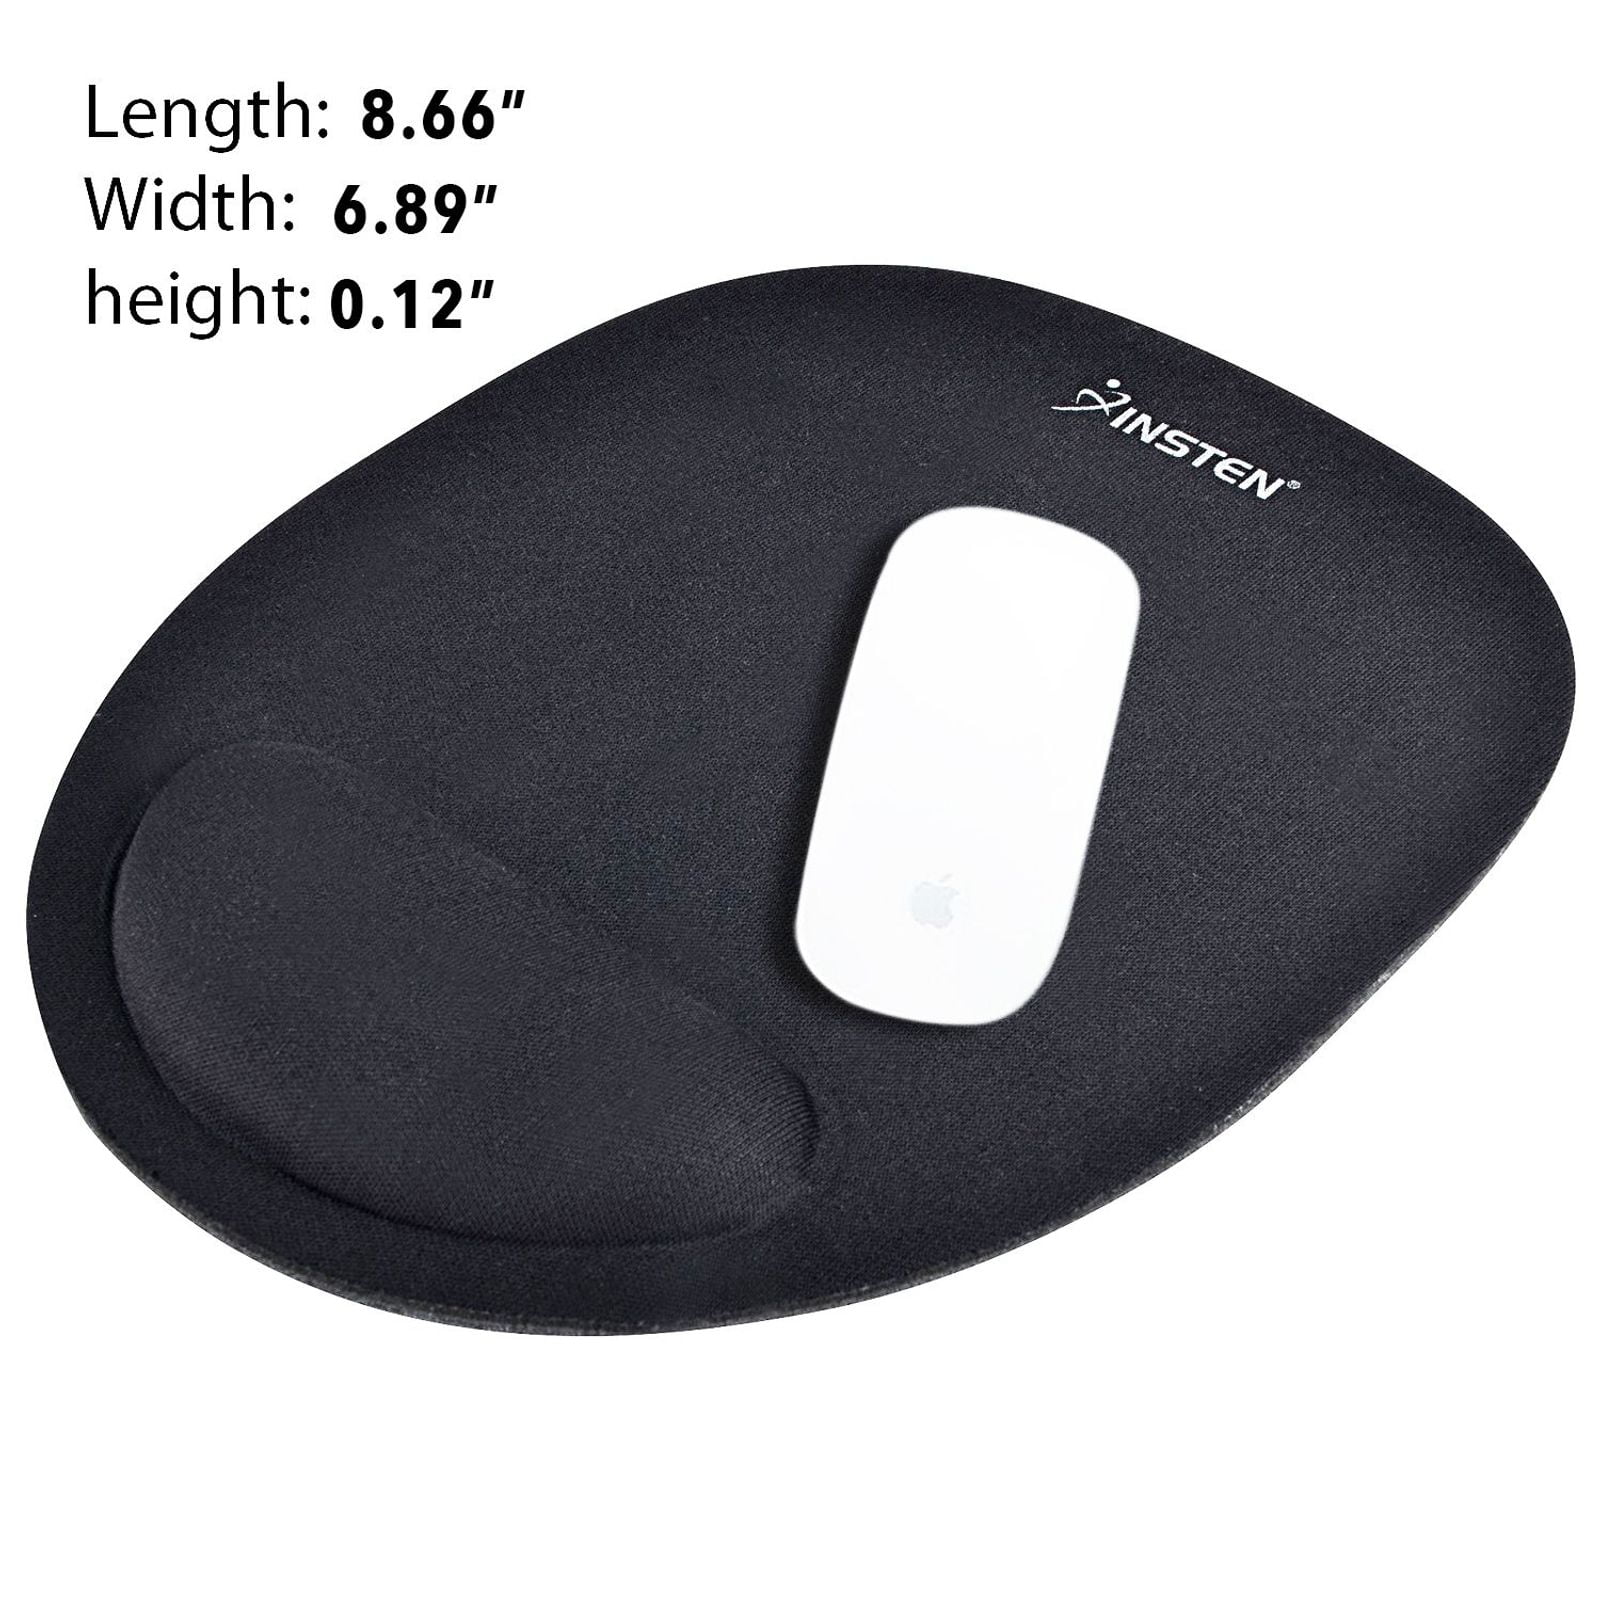 BLACK Comfortable Cushioned Wrist Rest Mouse Pad Perfect Height Easy Clicking 